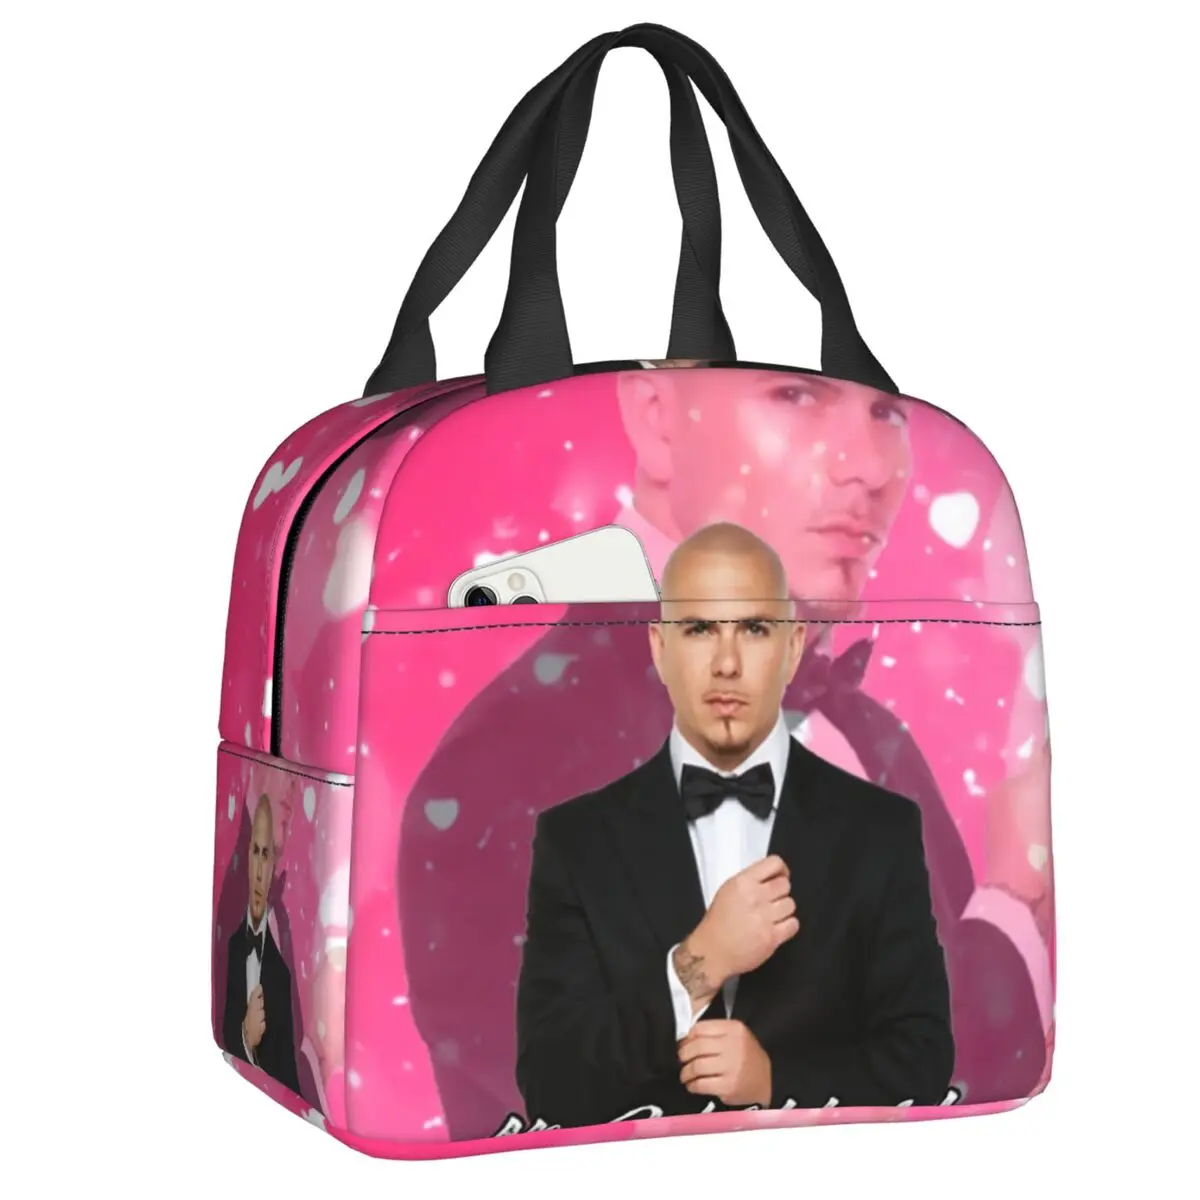 

Mr Worldwide Says To Live Laugh Love Pink Insulated Lunch Bags for Outdoor Picnic Pitbull Resuable Cooler Thermal Lunch Box